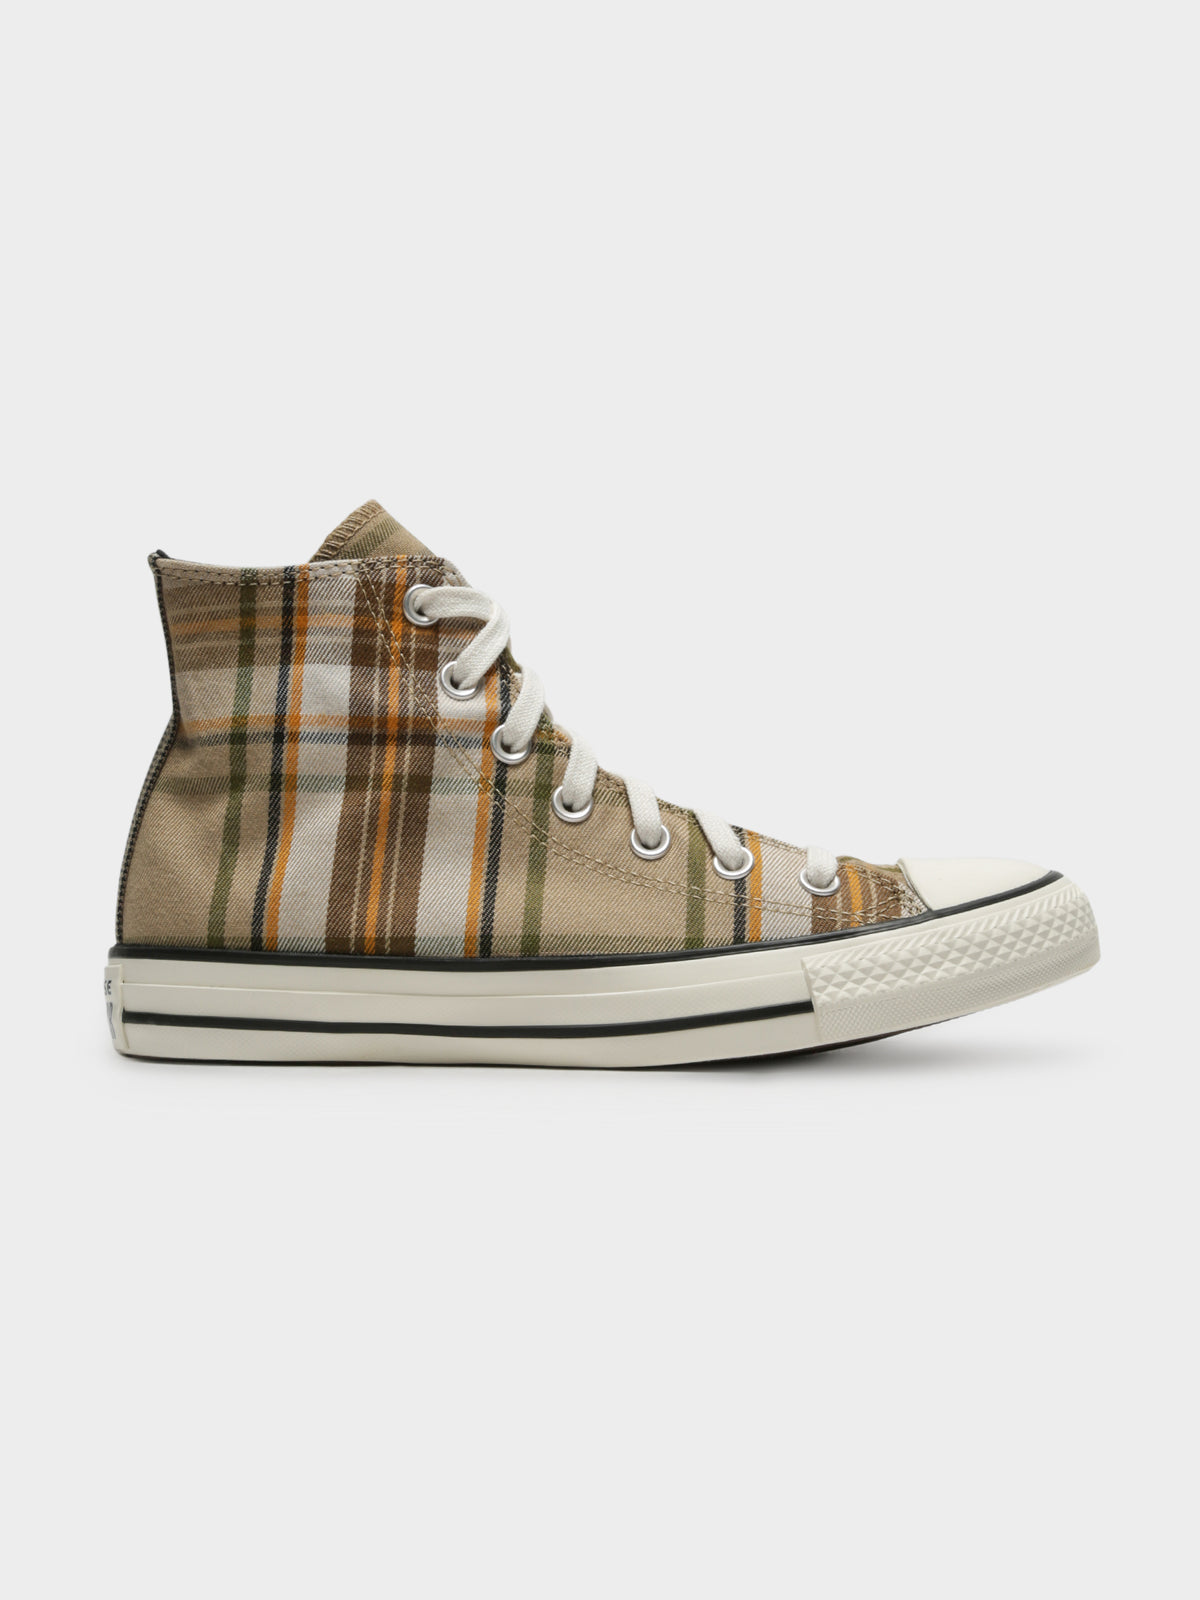 Womens Chuck Taylor All Star Mix &amp; Match High Top Sneakers in Nomad Khaki